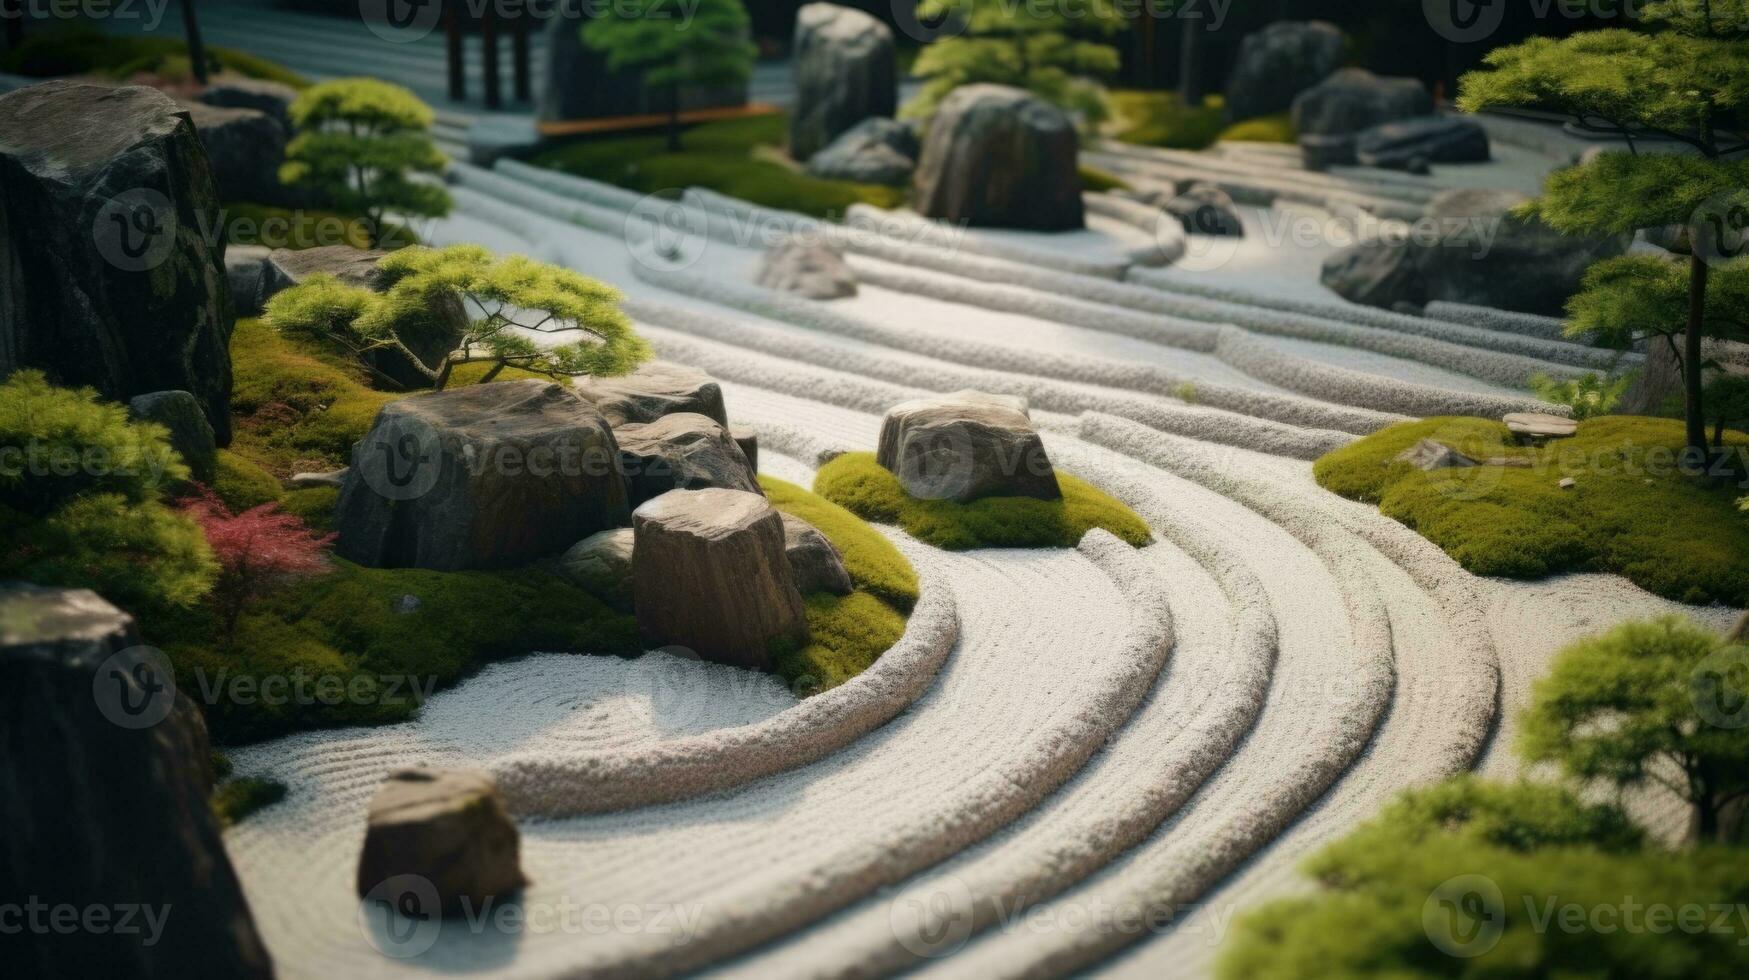 Zen Garden miniature Background images for websites wallpapers presentations banners advertising. AI generative photo